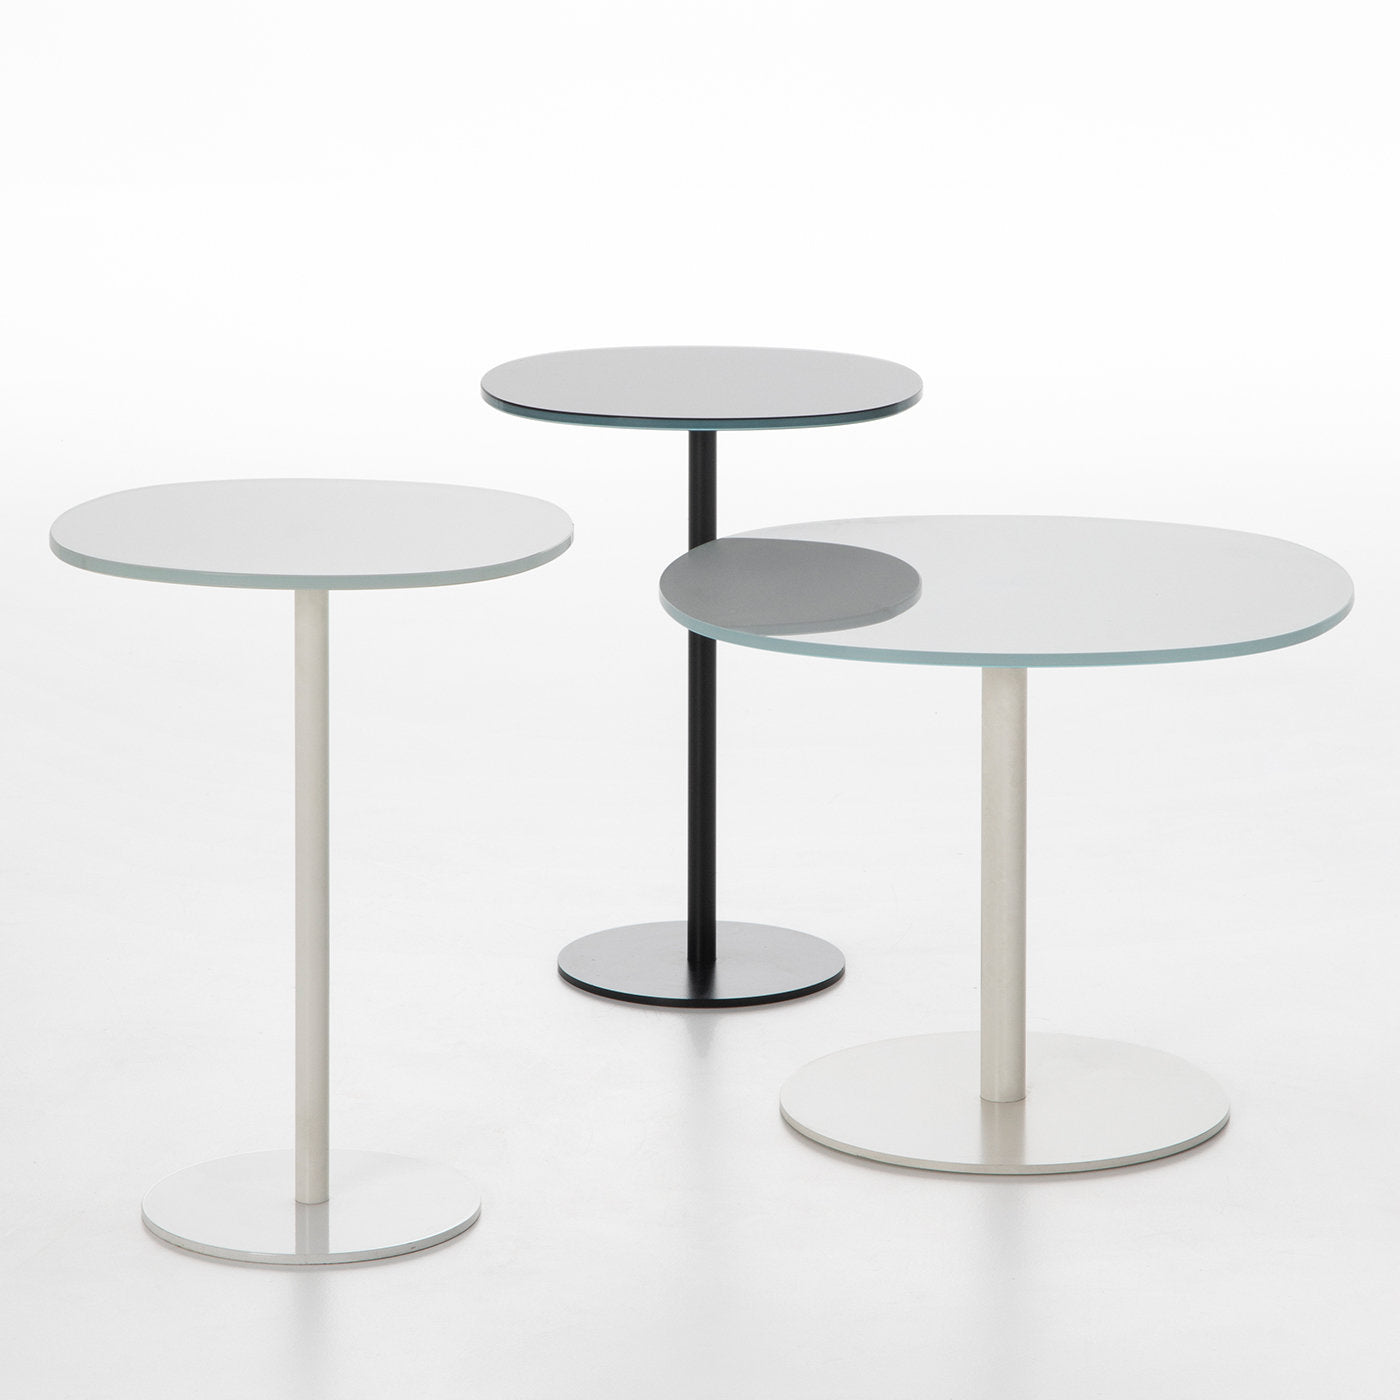 Solenoide White Low Side Table by Piero Lissoni - Alternative view 1